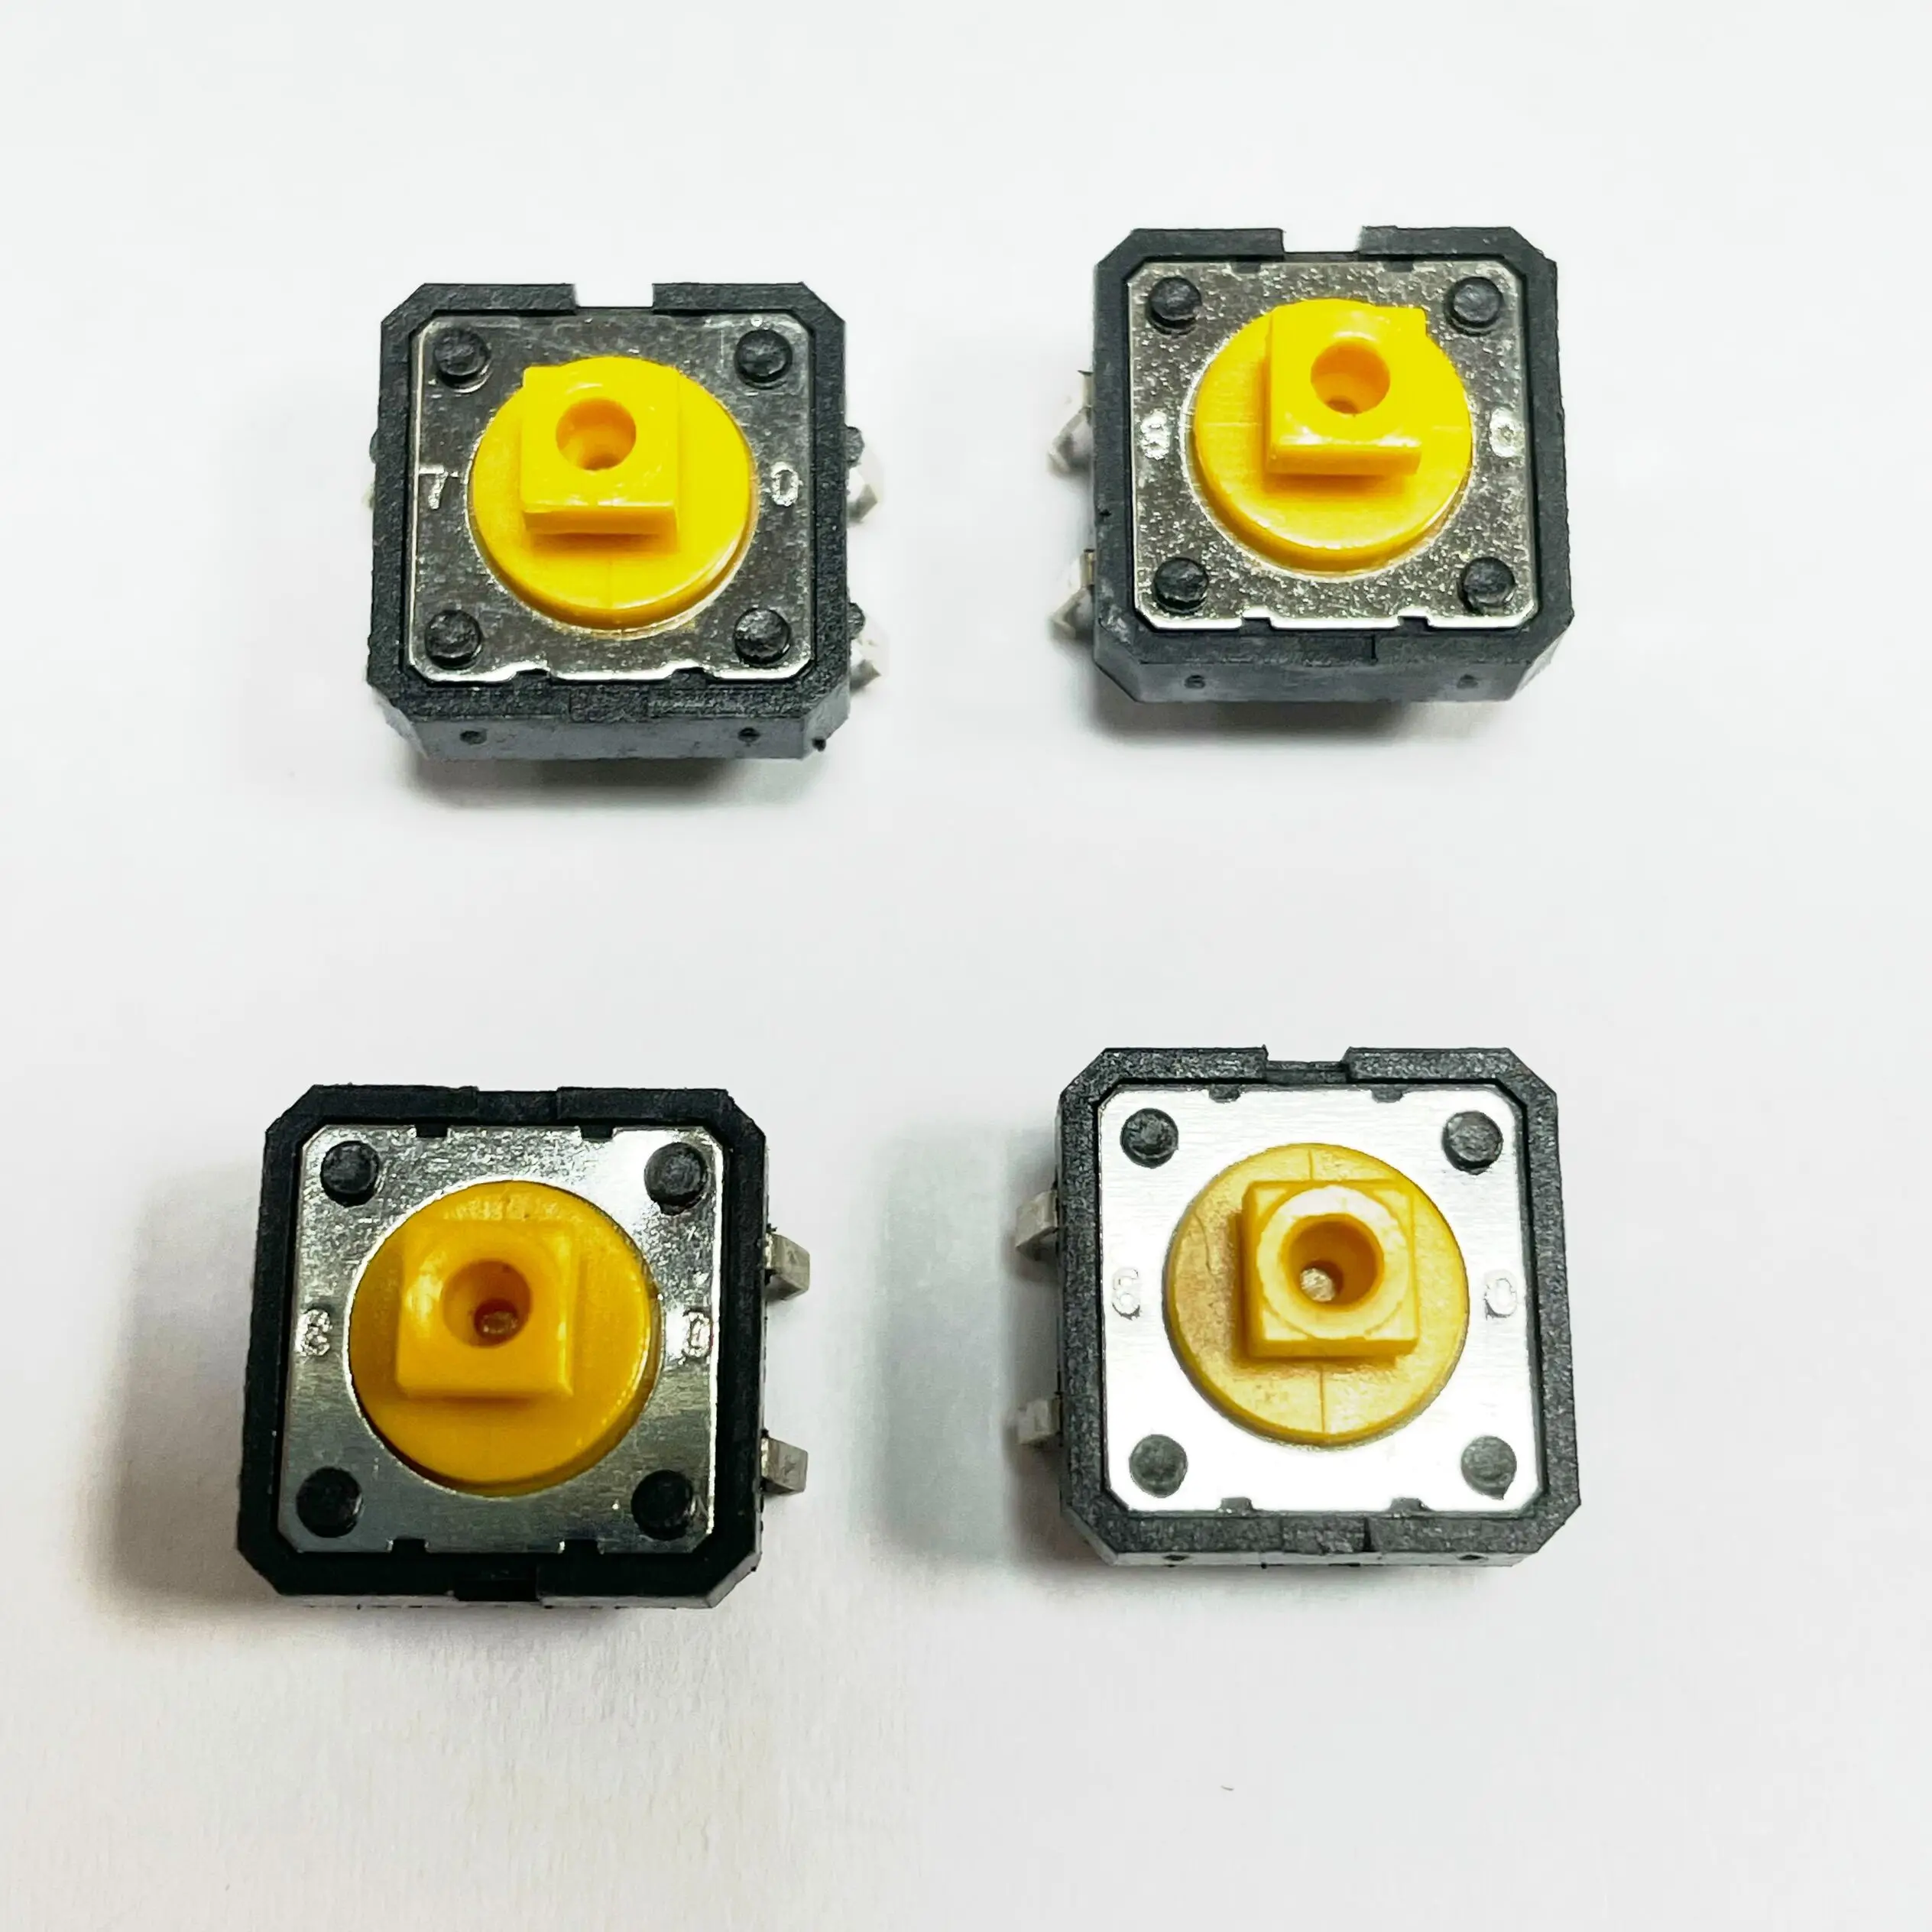 5PCS/LOT B3F-4055 12x12x7.3 mm Tactile Switches Yellow Square Push Button Tact Switch 12*12*7.3 mm Micro switch 4 6 3 2 2 5 micro switch tactile push button for buick for chevroelt cruze byd car remote control key button switches